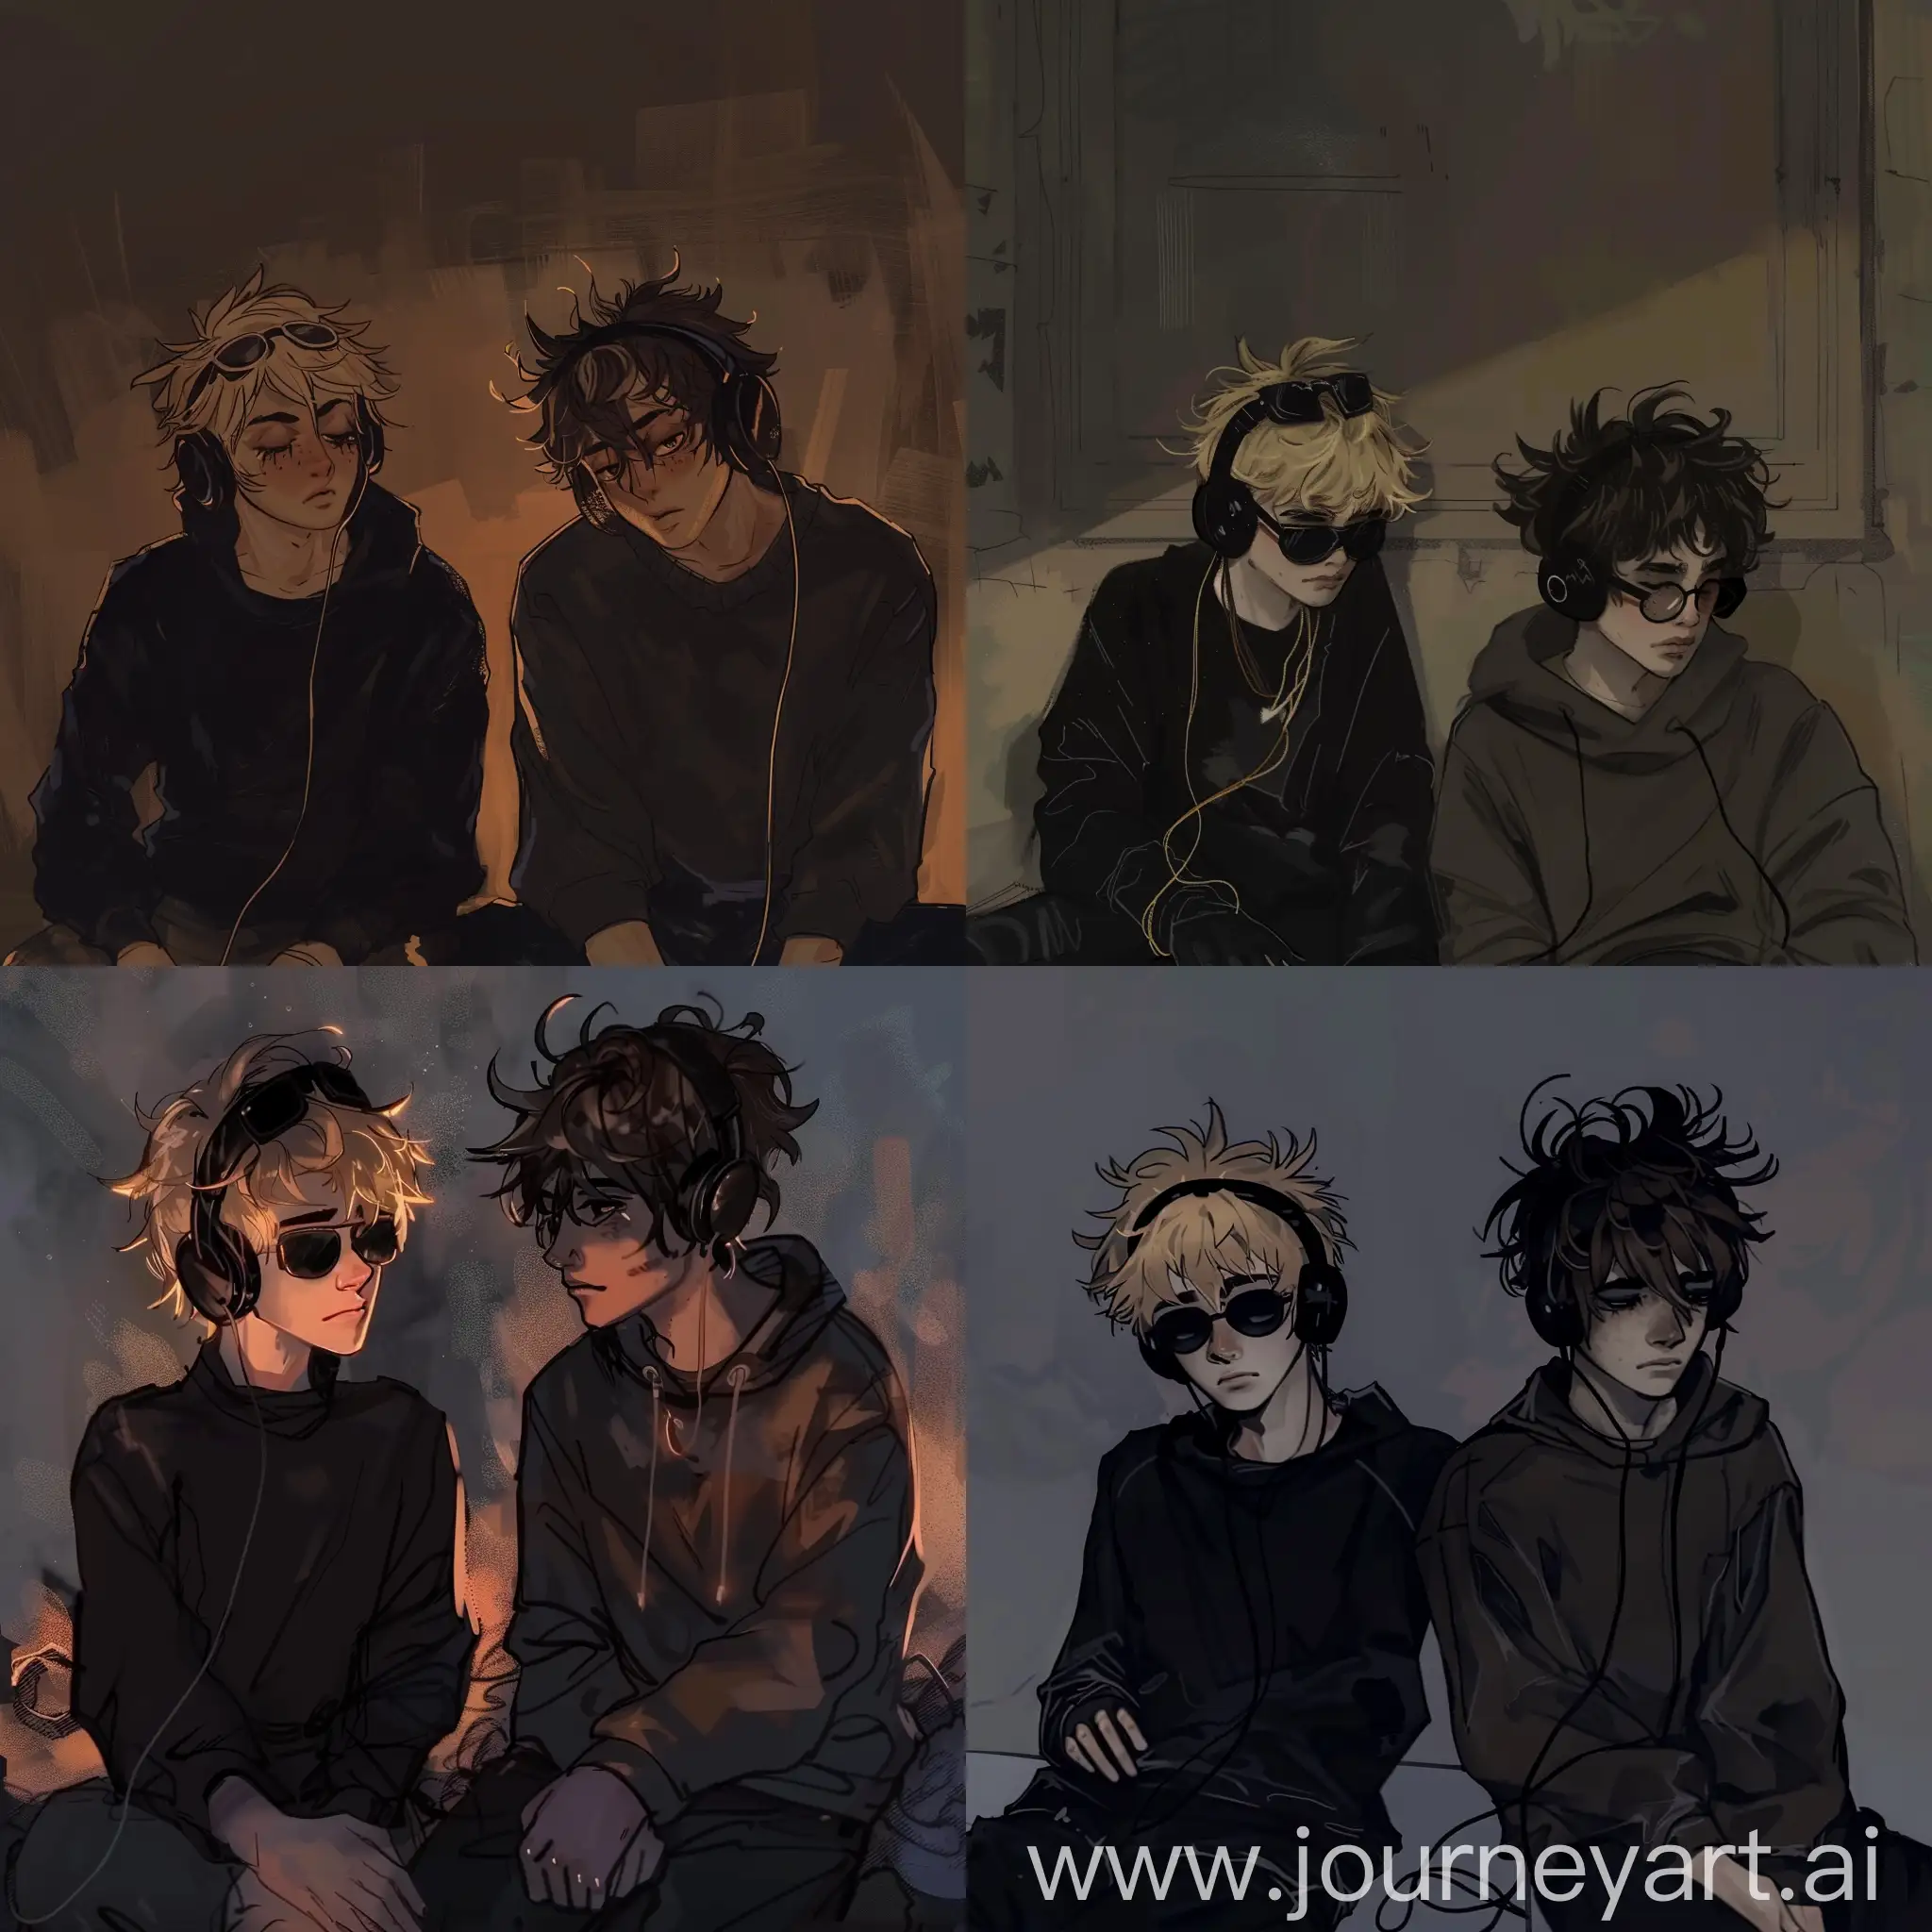 Animated-Drawing-of-Two-Teenage-Boys-Sketching-at-Night